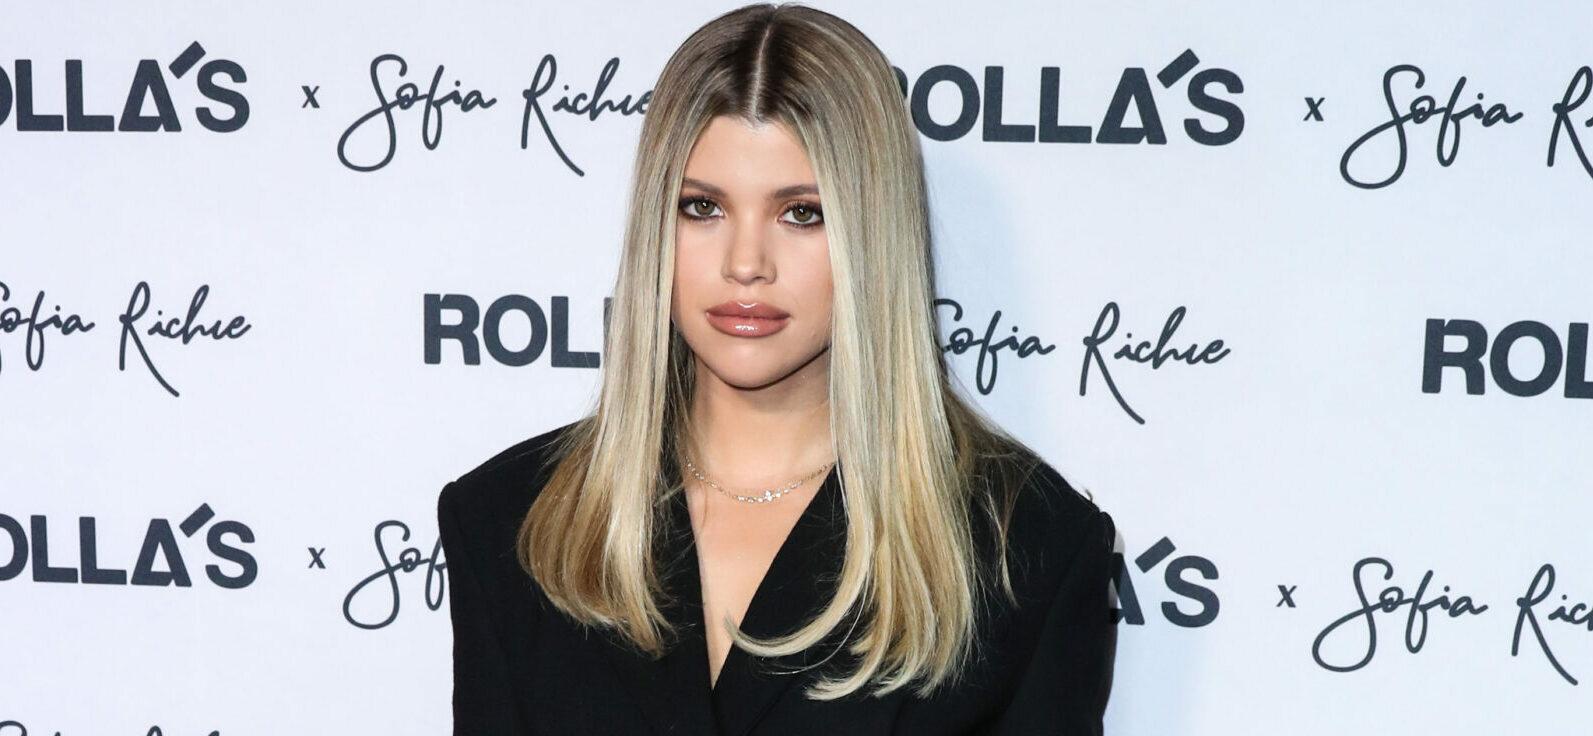 Sofia Richie Receive Rave Reactions After Teasing Fashion Line